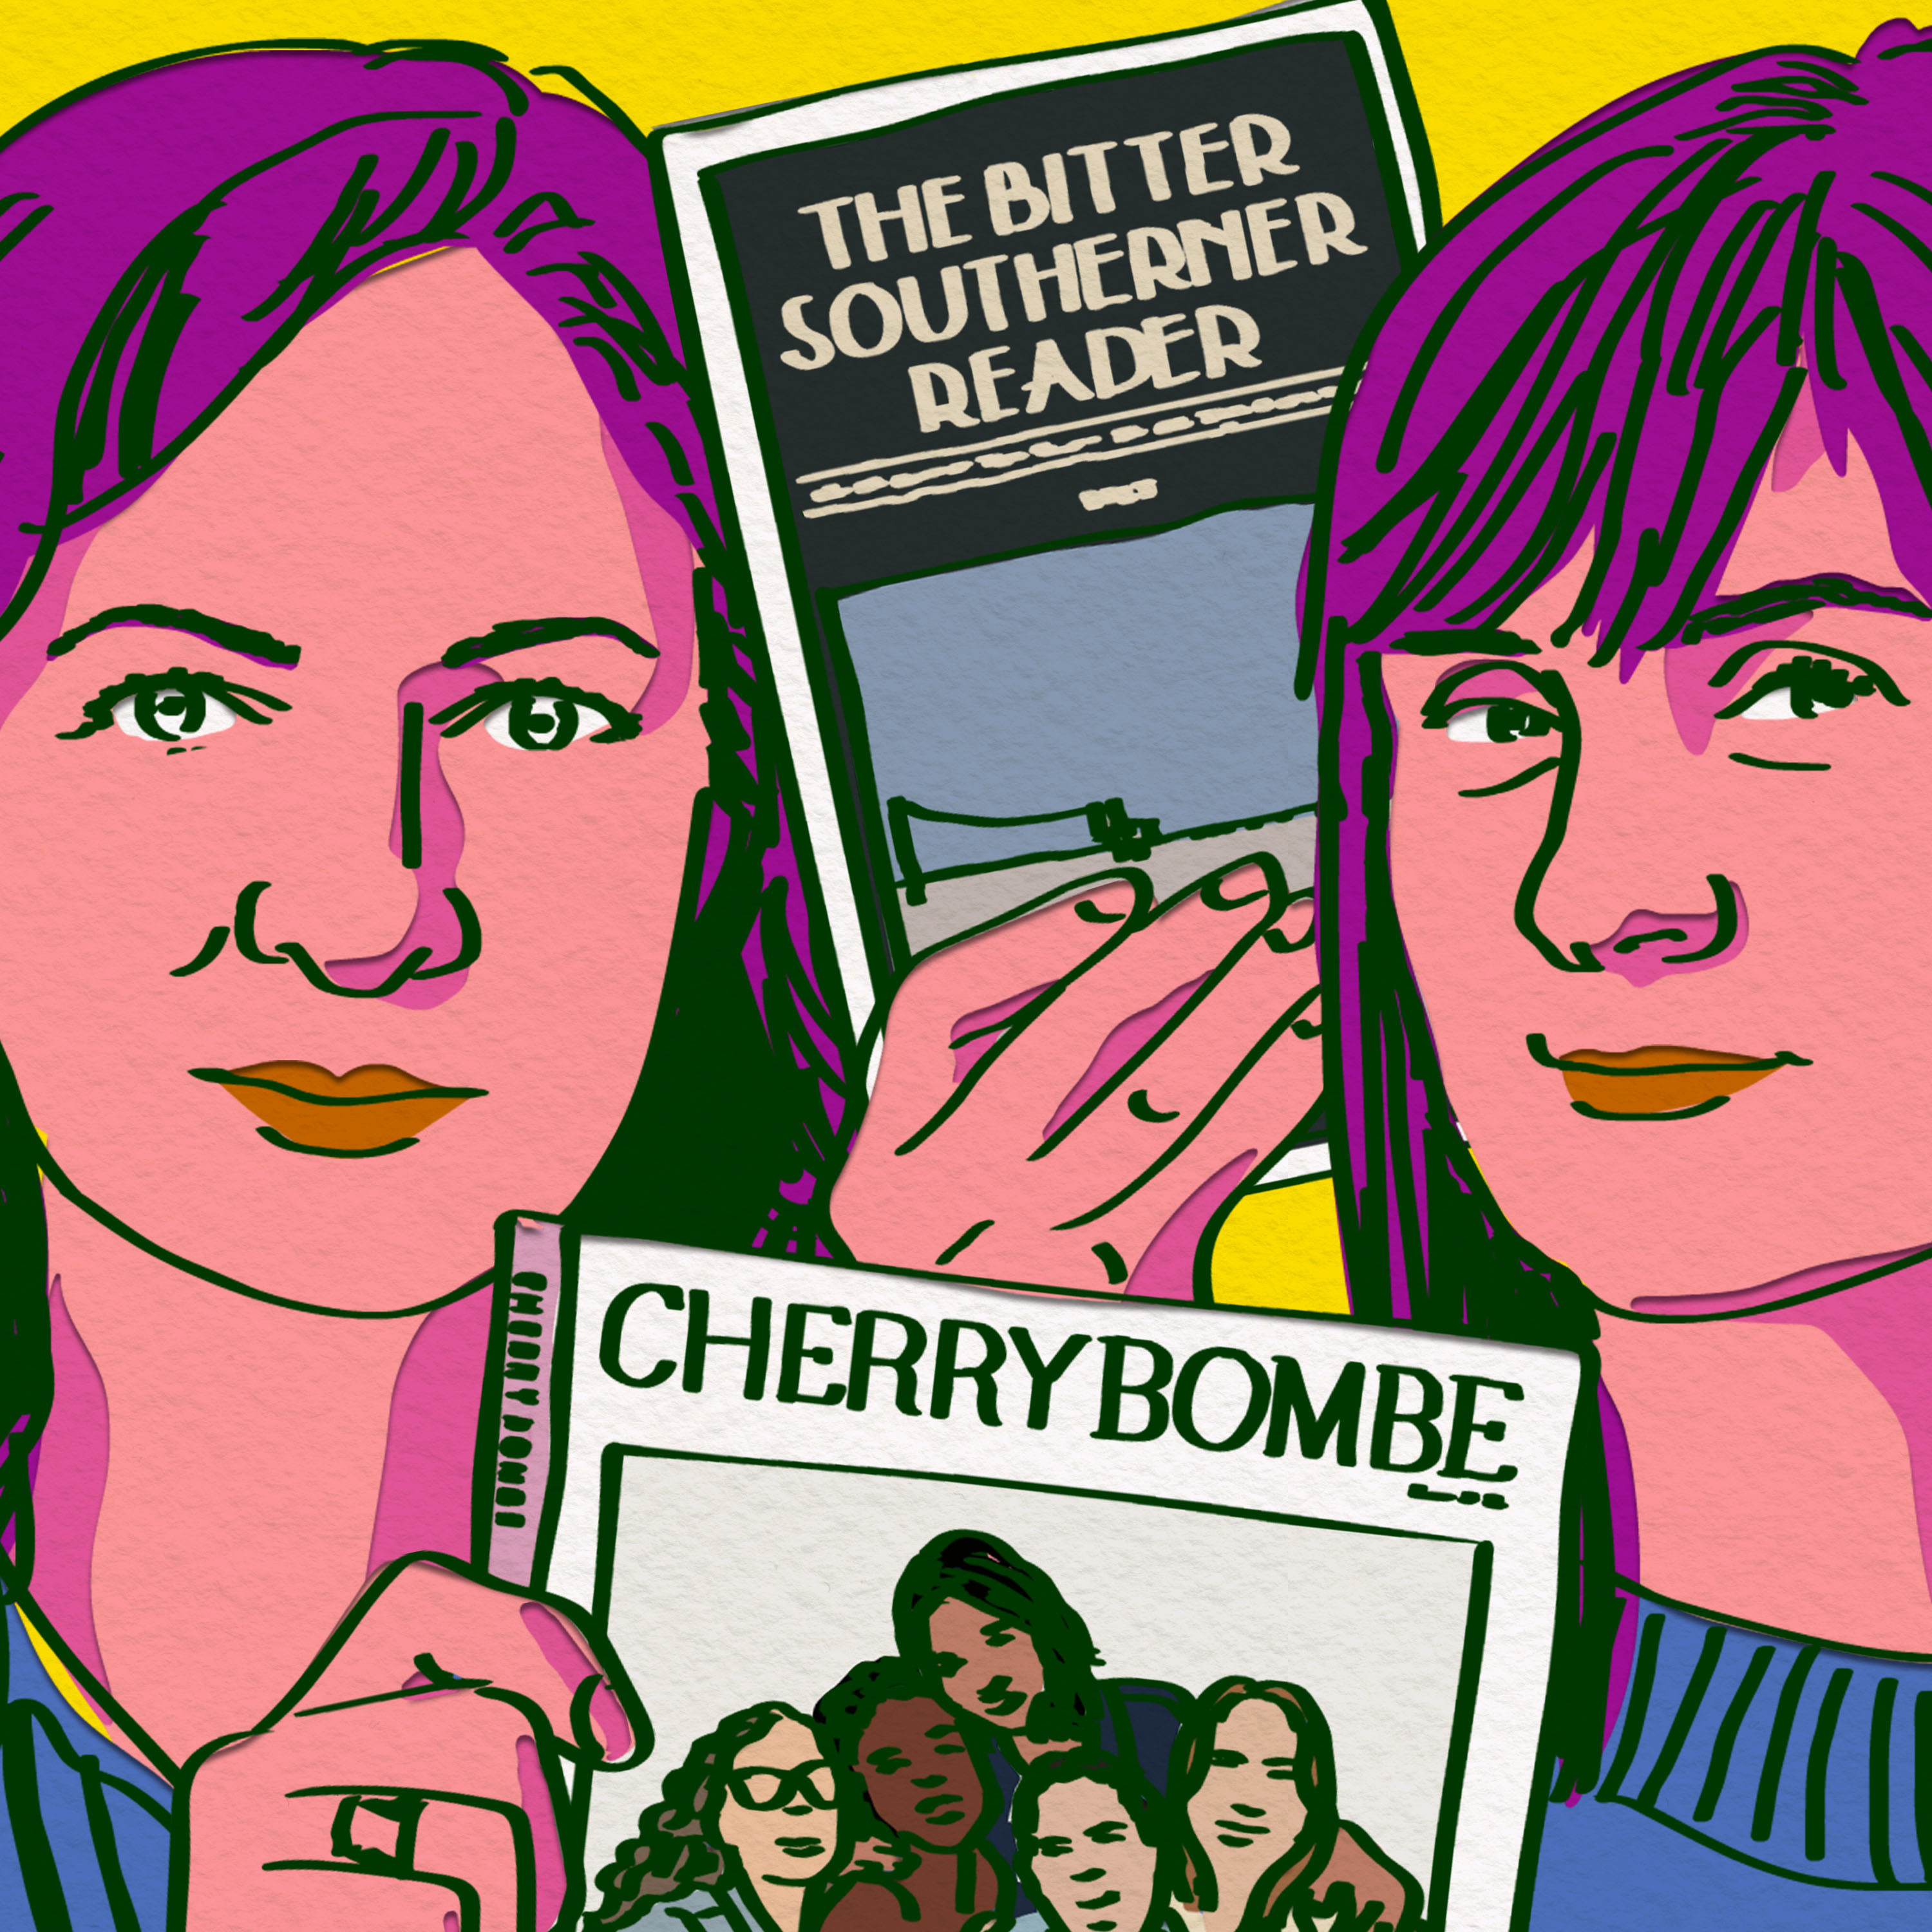 261: Cherry Bombe & The Bitter Southerner